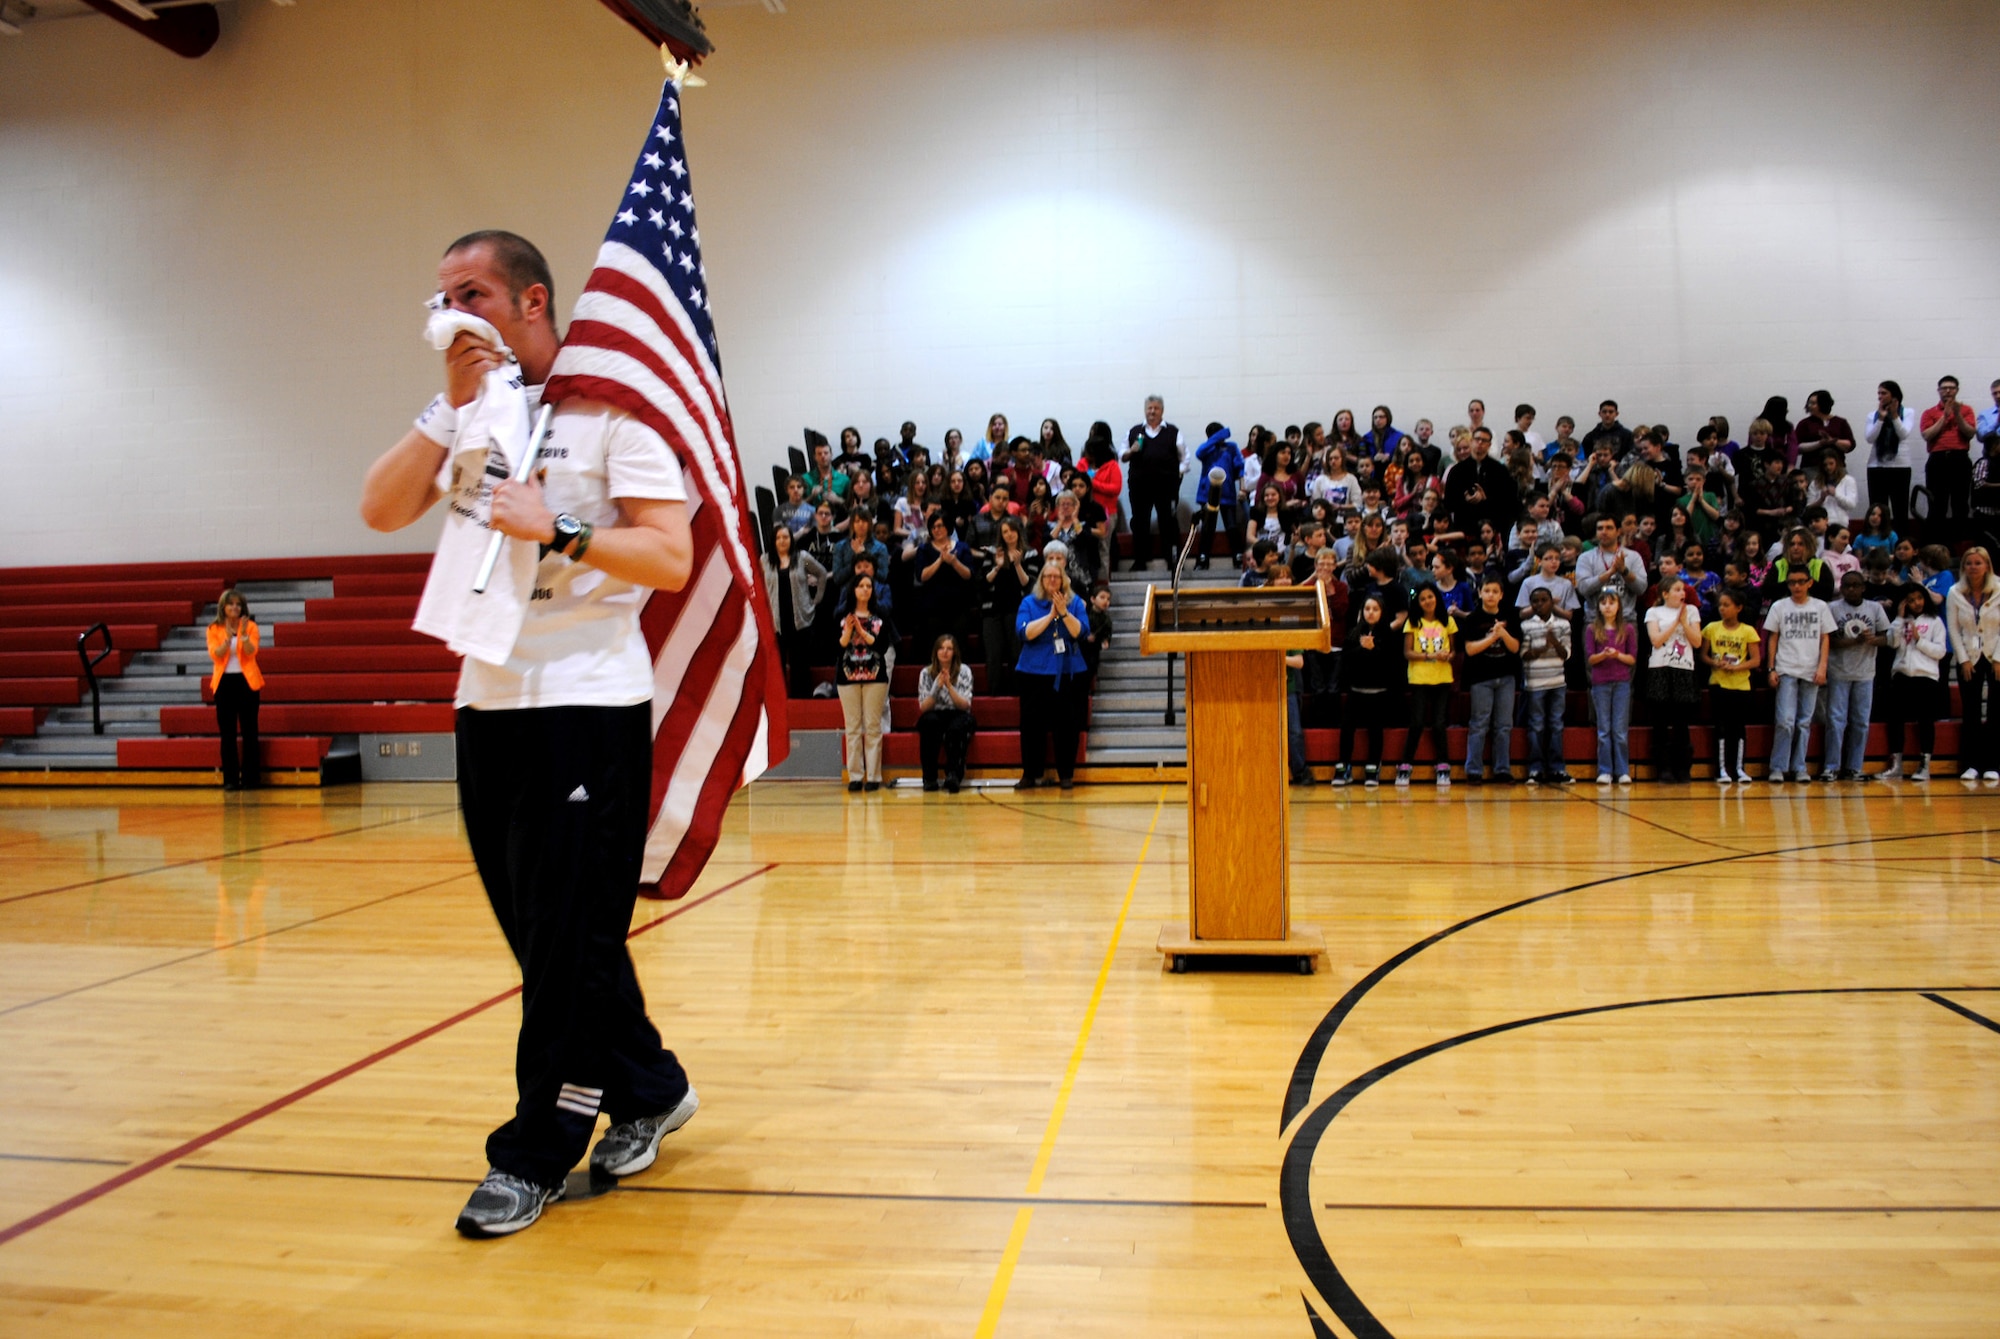 Kurt Philion wipes the tears off his face as he walks away from a podium after delivering a speech about how the death of his friend, an Army sergeant, inspires him to keep running marathons and other races during a March 25, 2013, visit at to Nathan Twining Elementary on Grand Forks Air Force Base, N.D. Philion runs races in memory of his friend, Sgt. Corey Rystad, who was killed in Iraq in 2006. (U.S. Air Force photo/Staff Sgt. Luis Loza Gutierrez)
